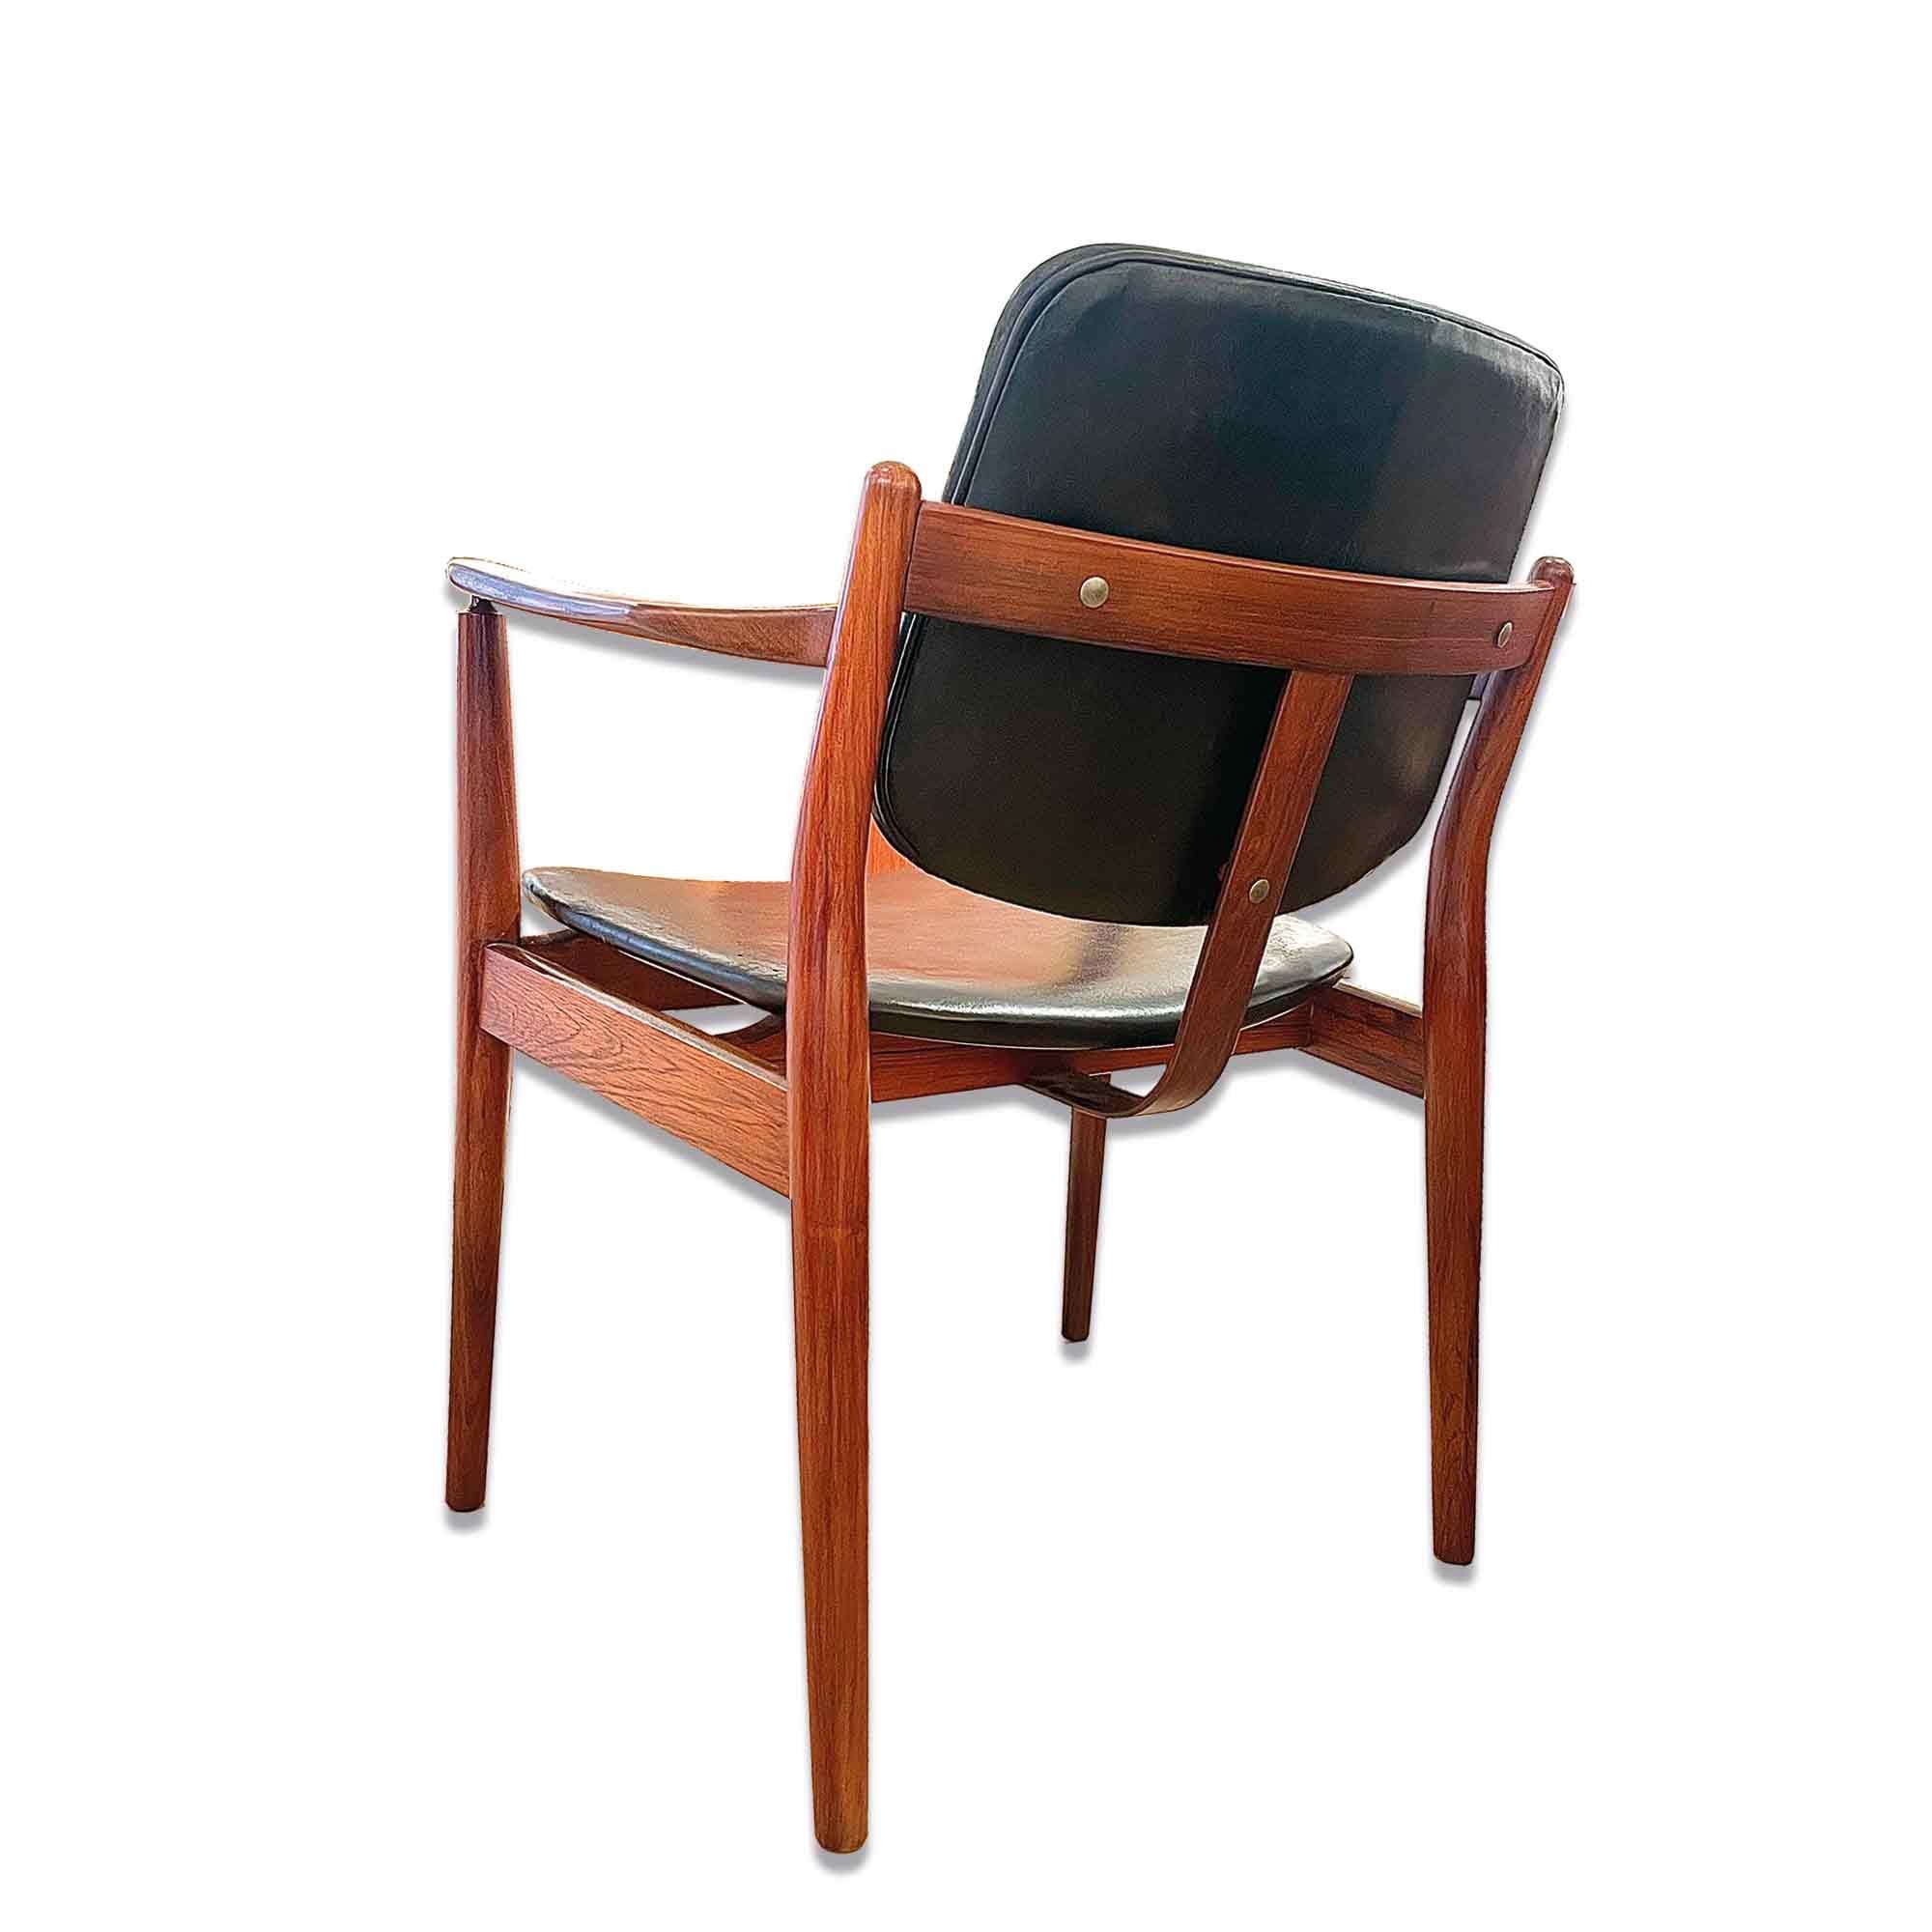 Rosewood armchair by the great Danish designer Arne Vodder. The clean lines and minimalist details of this armchair make it an elegant and timeless choice. Rosewood provides natural warmth, plus its veining is very remarkable. The Scandinavian